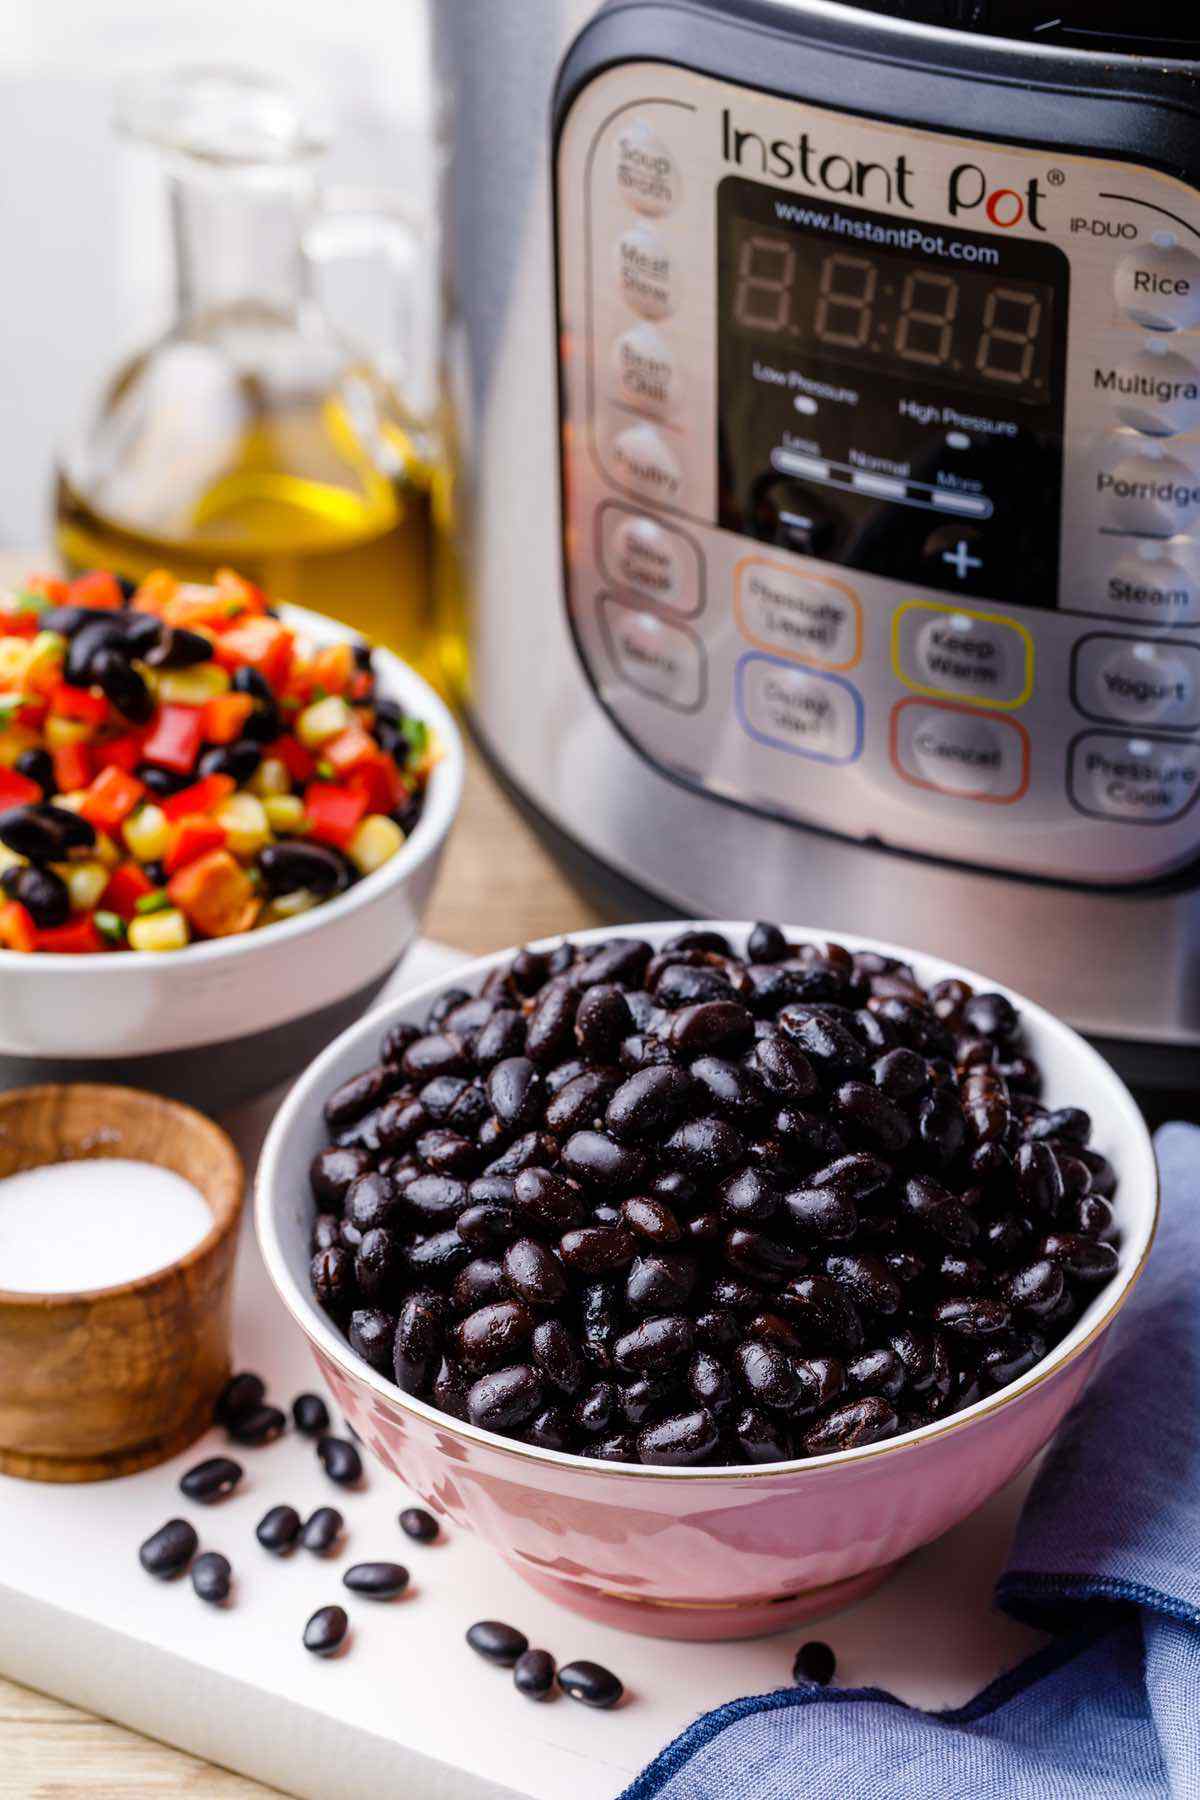 How to Cook Instant Pot Black Beans Without Soaking Them